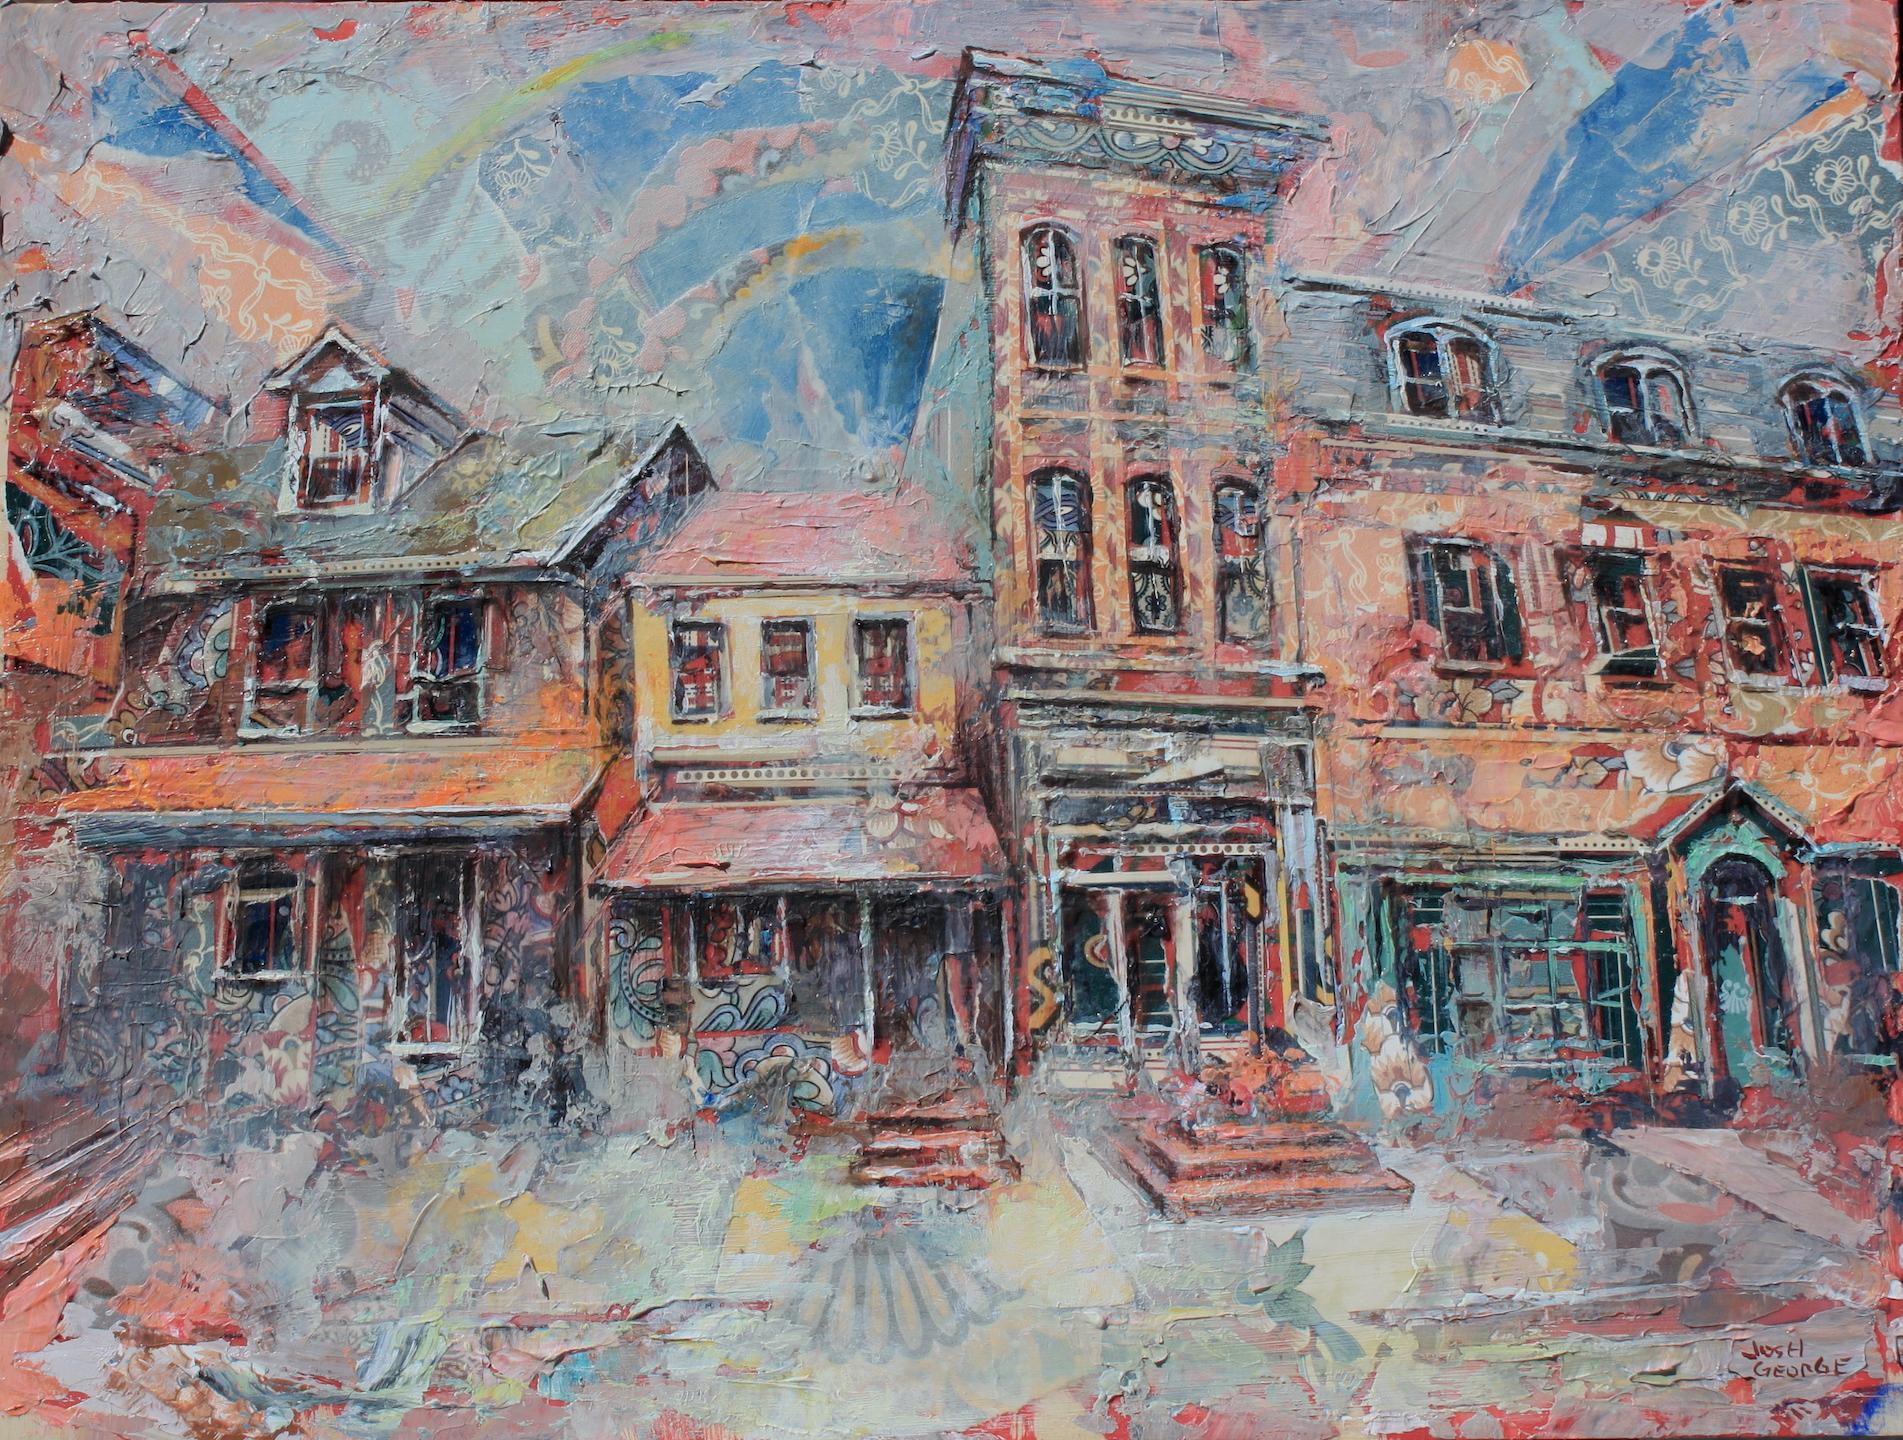 Josh George Landscape Painting - "State Street, " Mixed Media Painting